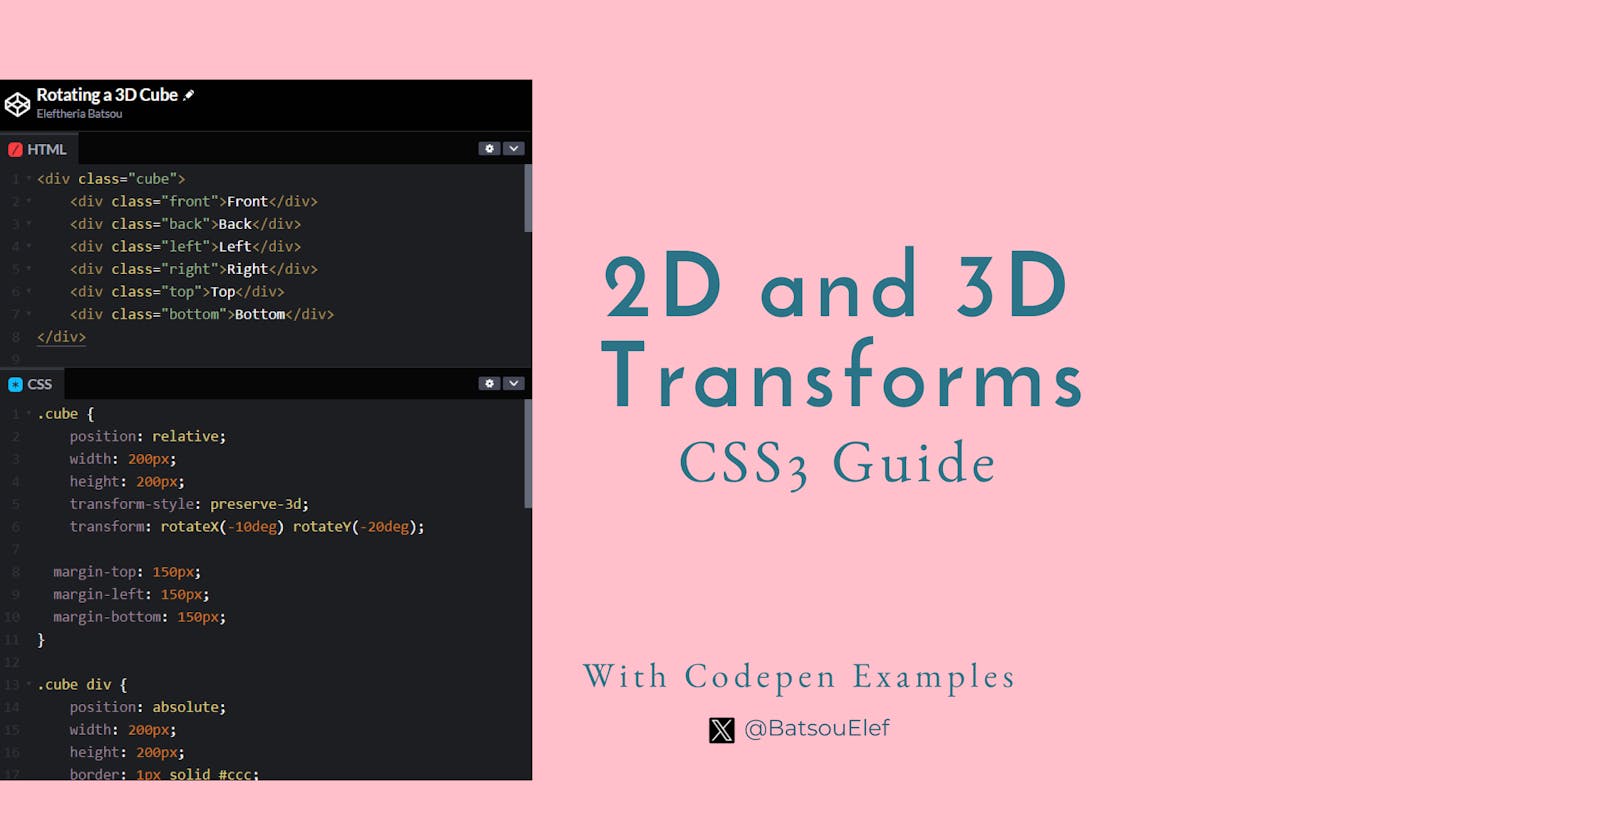 How to Use CSS3 2D and 3D Transforms